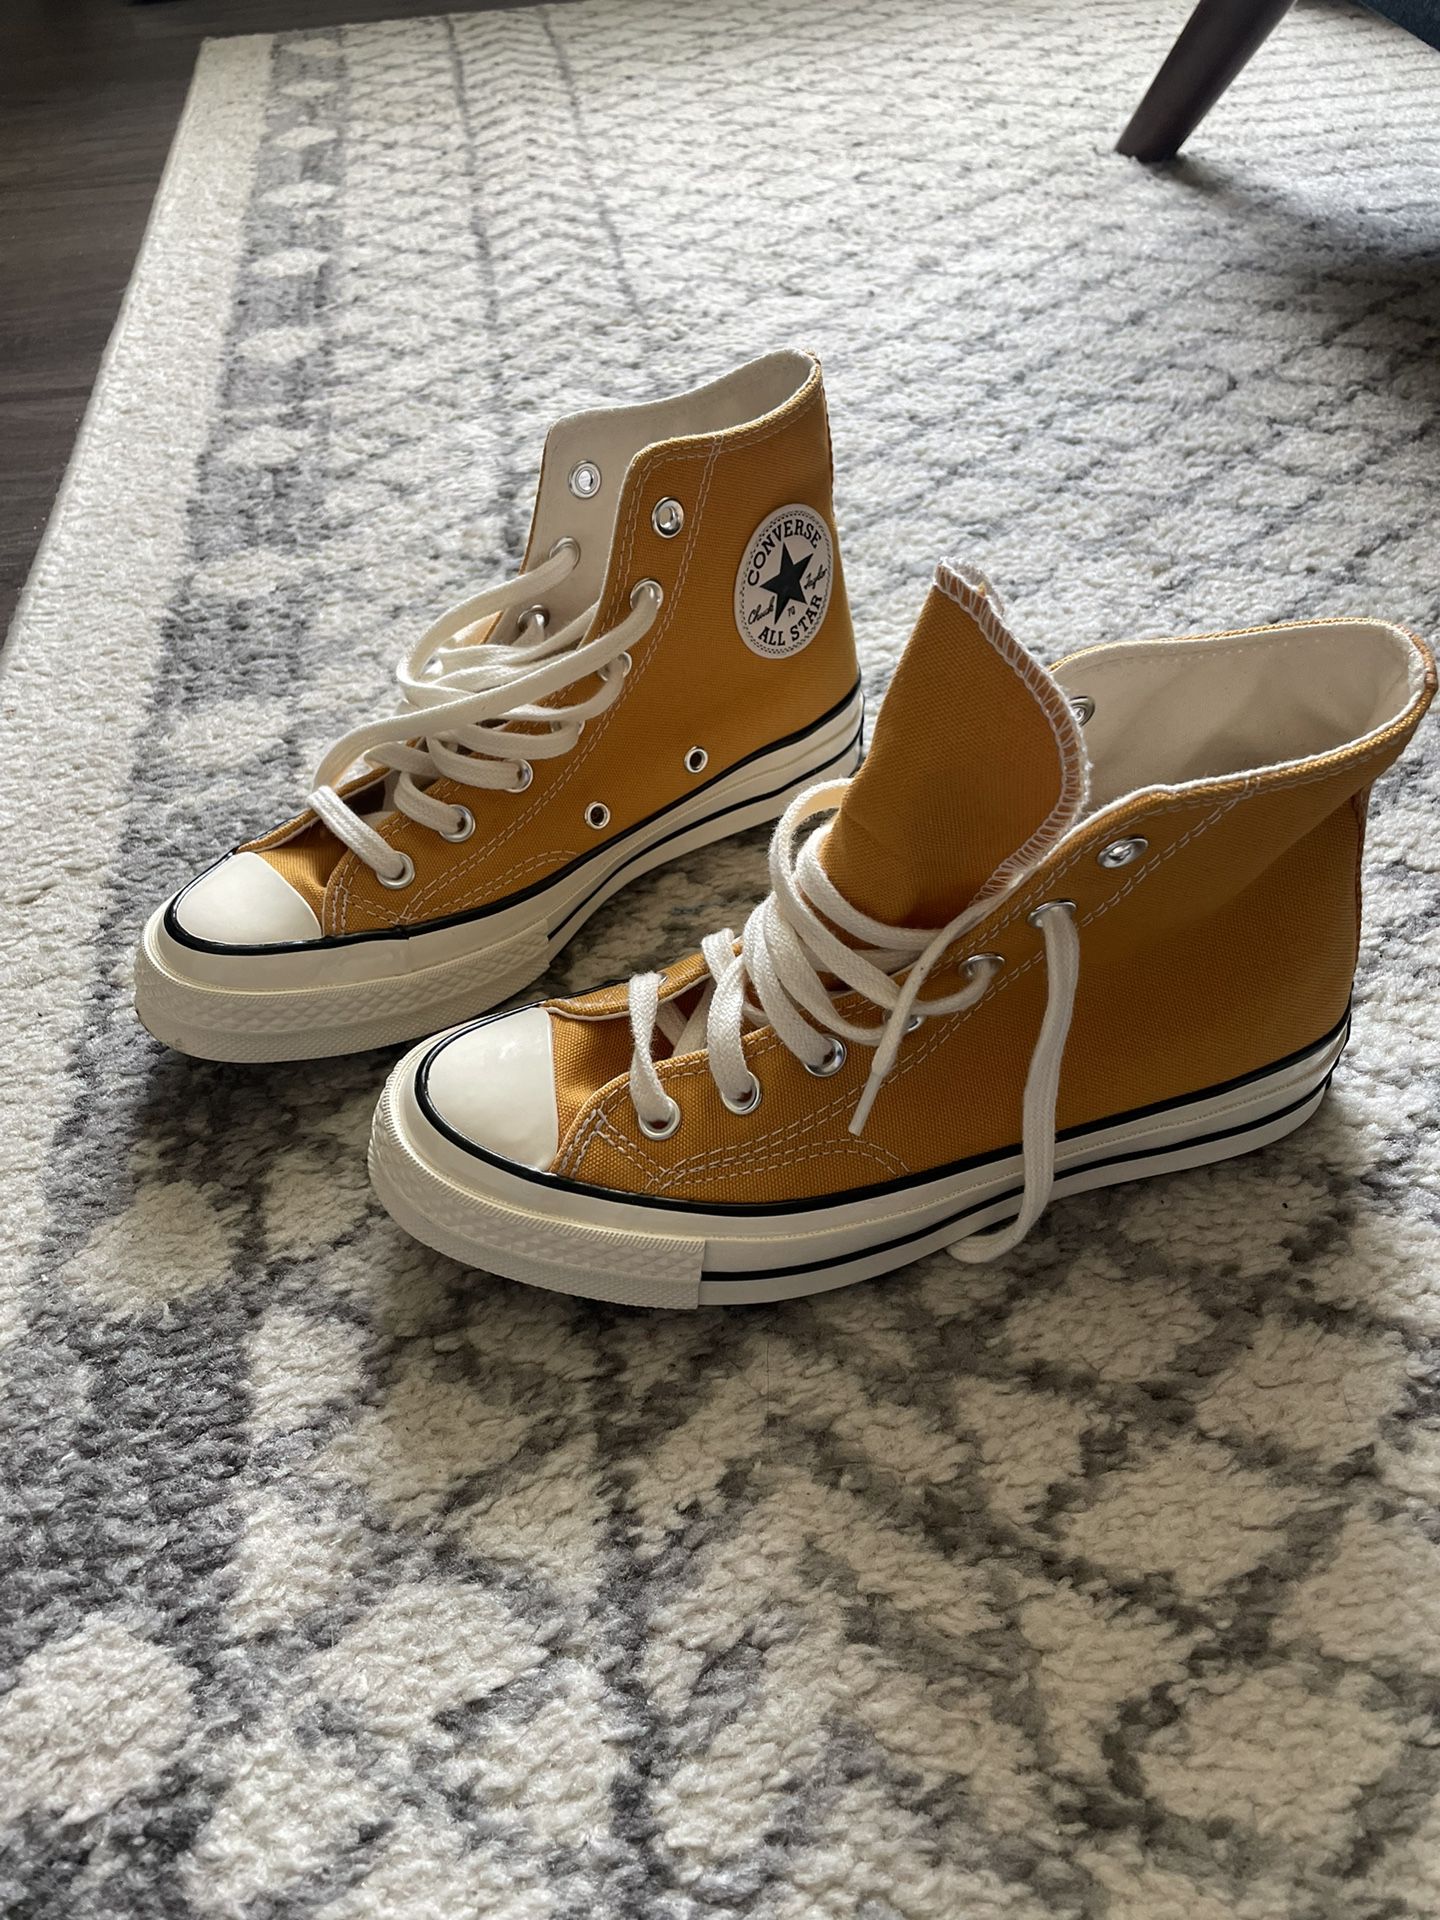 Womens High top Converse Shoes Size 7.